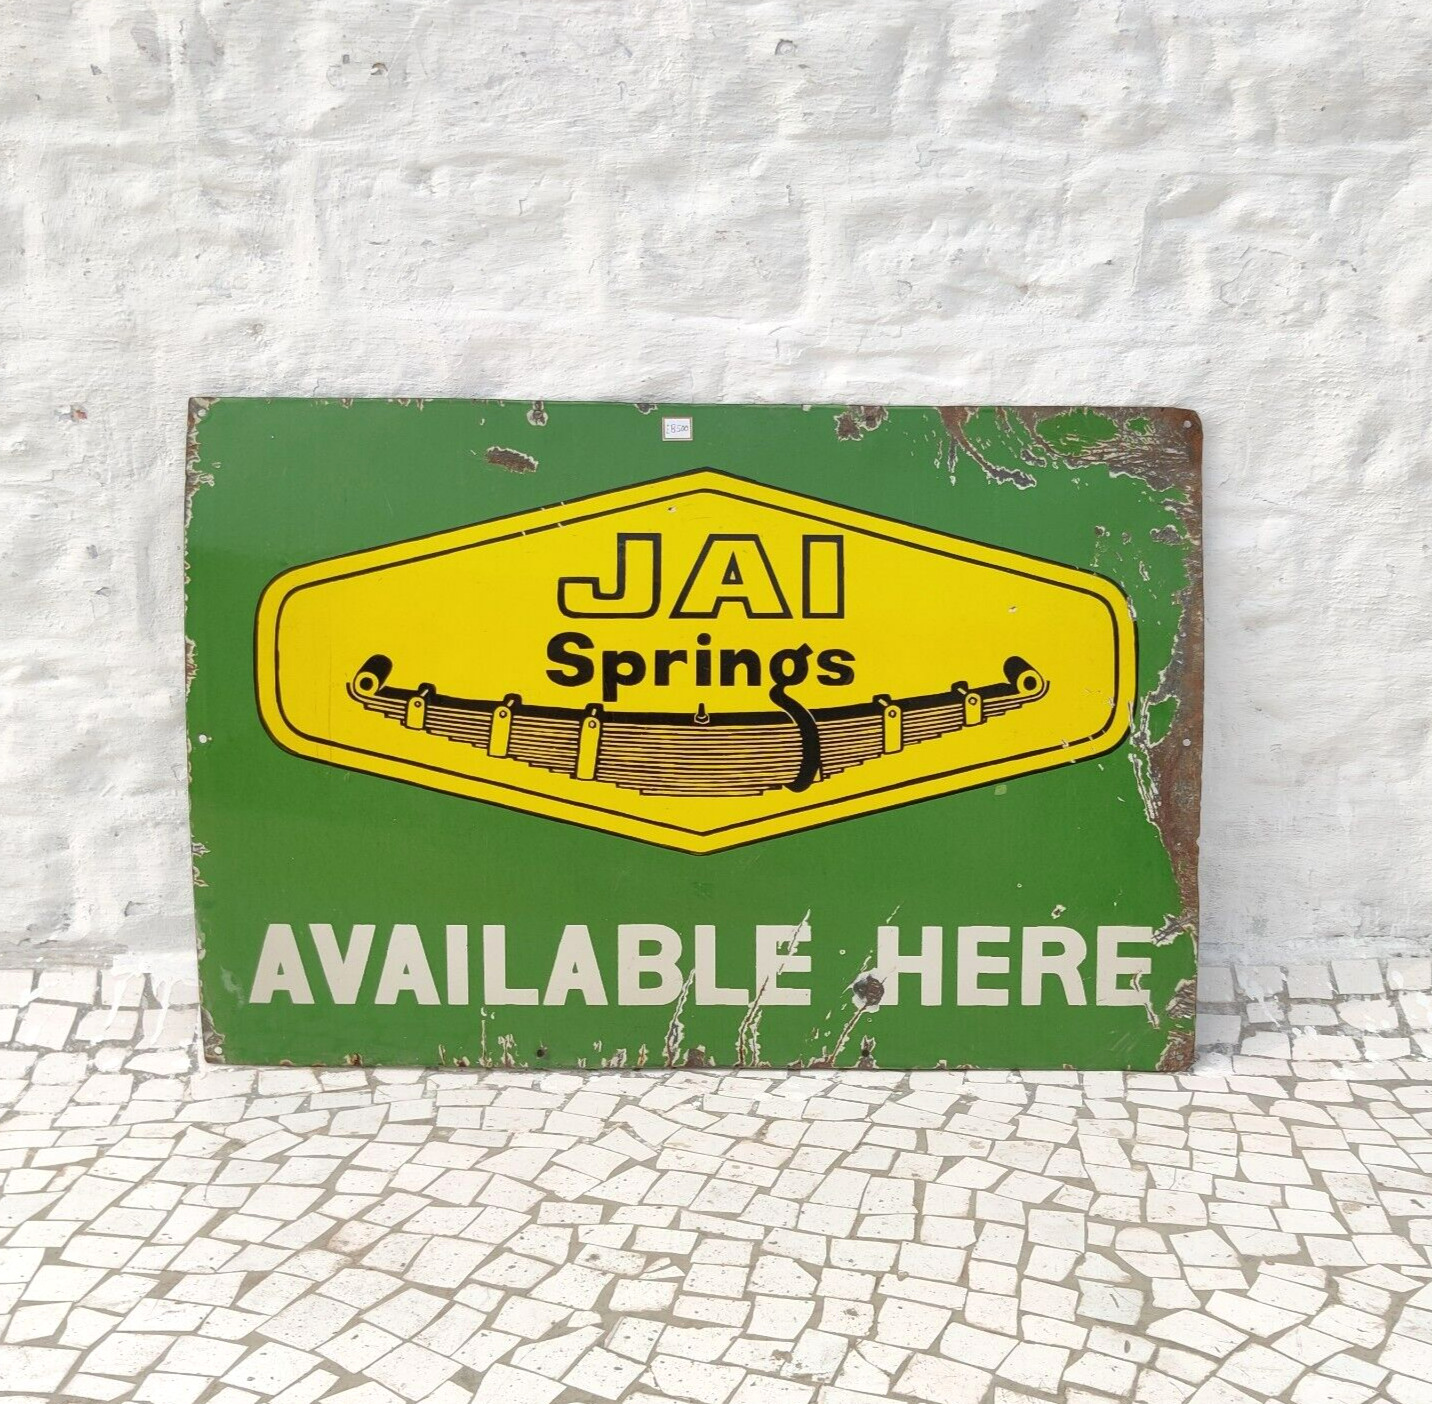 1950 Vintage Jai Springs Available Here Advertising Enamel Sign Automobile EB500